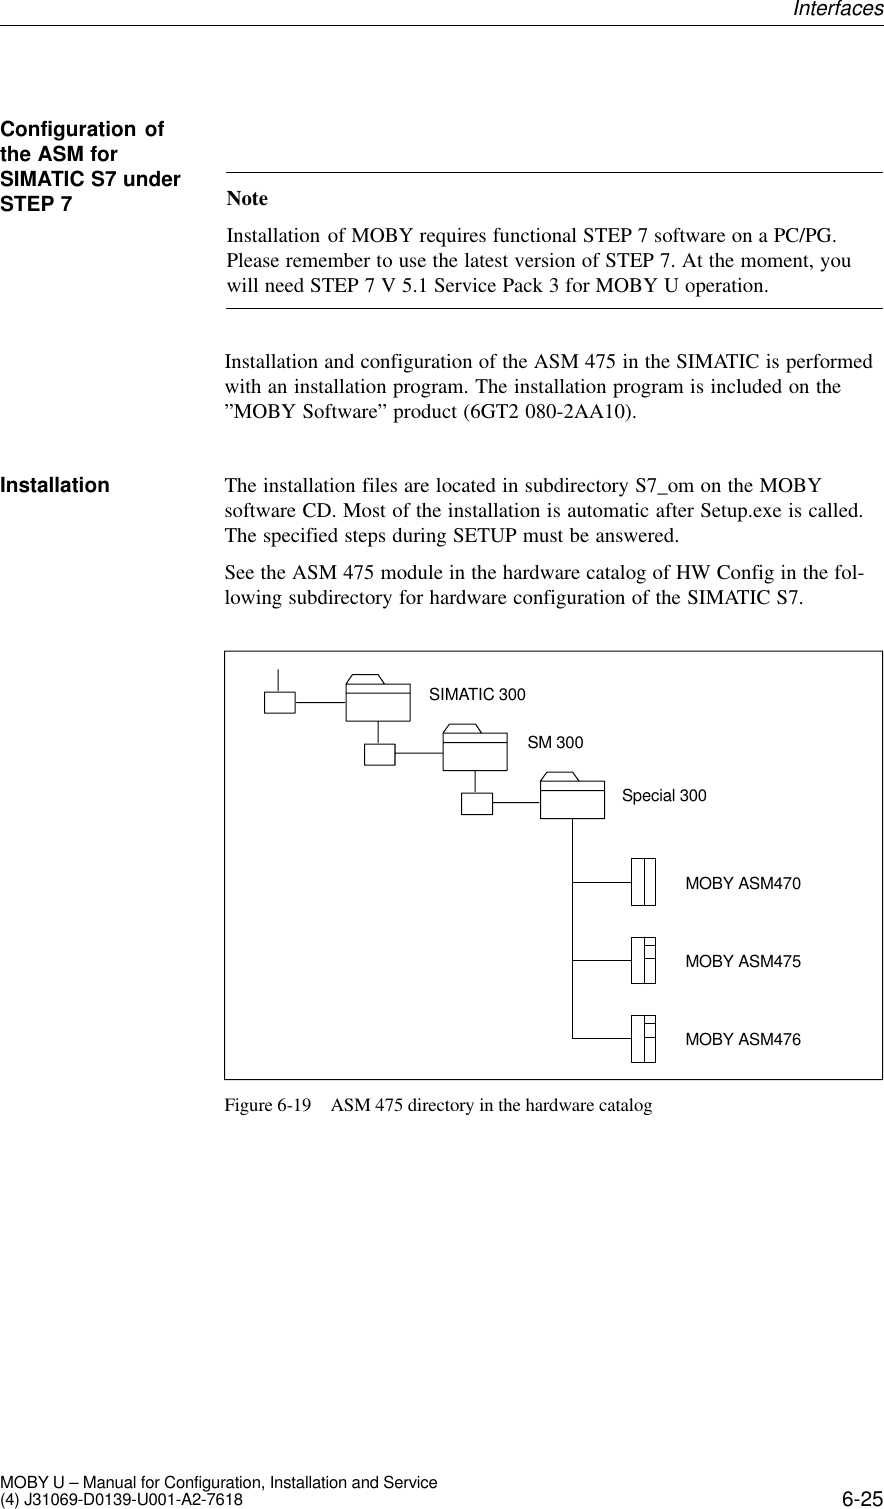 6-25MOBY U – Manual for Configuration, Installation and Service(4) J31069-D0139-U001-A2-7618NoteInstallation of MOBY requires functional STEP 7 software on a PC/PG.Please remember to use the latest version of STEP 7. At the moment, youwill need STEP 7 V 5.1 Service Pack 3 for MOBY U operation.Installation and configuration of the ASM 475 in the SIMATIC is performedwith an installation program. The installation program is included on the”MOBY Software” product (6GT2 080-2AA10).The installation files are located in subdirectory S7_om on the MOBYsoftware CD. Most of the installation is automatic after Setup.exe is called.The specified steps during SETUP must be answered.See the ASM 475 module in the hardware catalog of HW Config in the fol-lowing subdirectory for hardware configuration of the SIMATIC S7.SIMATIC 300SM 300Special 300MOBY ASM470MOBY ASM475MOBY ASM476Figure 6-19 ASM 475 directory in the hardware catalogConfiguration ofthe ASM forSIMATIC S7 underSTEP 7InstallationInterfaces